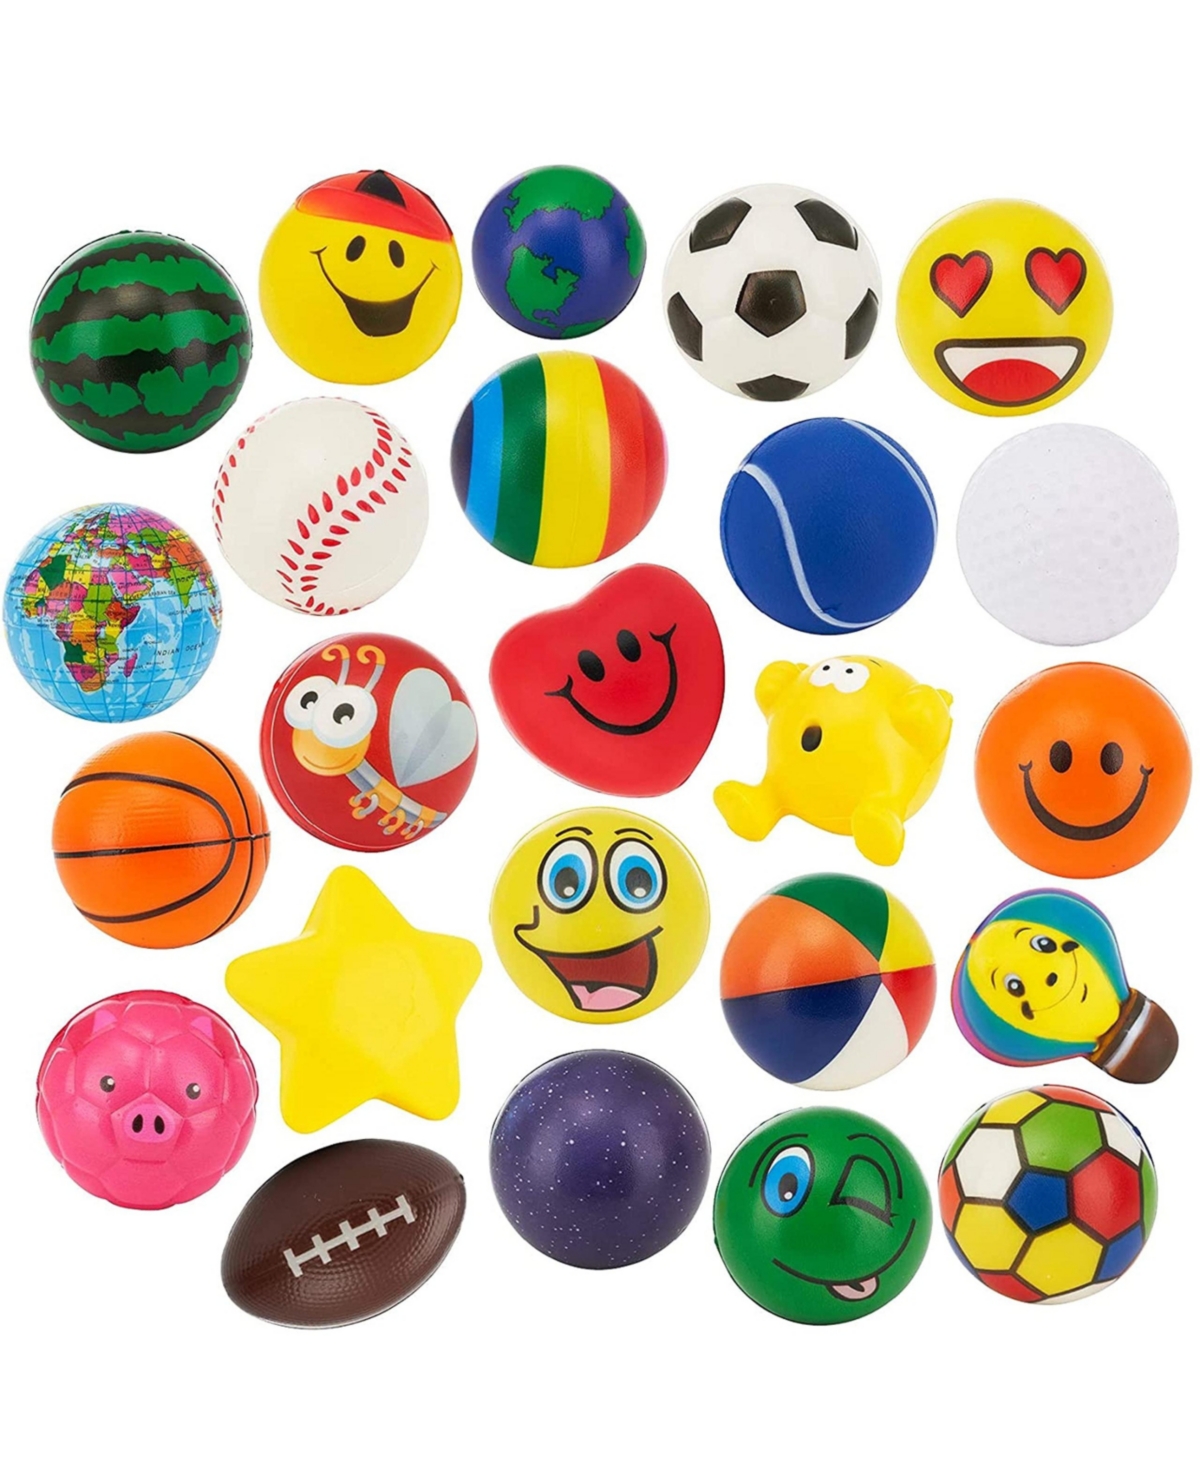 24 Stress Balls - Bulk Pack of 2.5" Stress Balls - Treasure Box Classroom Prizes, Party Favors, Or Just to De-Stress (2 Dozen) Assorted Designs and Co